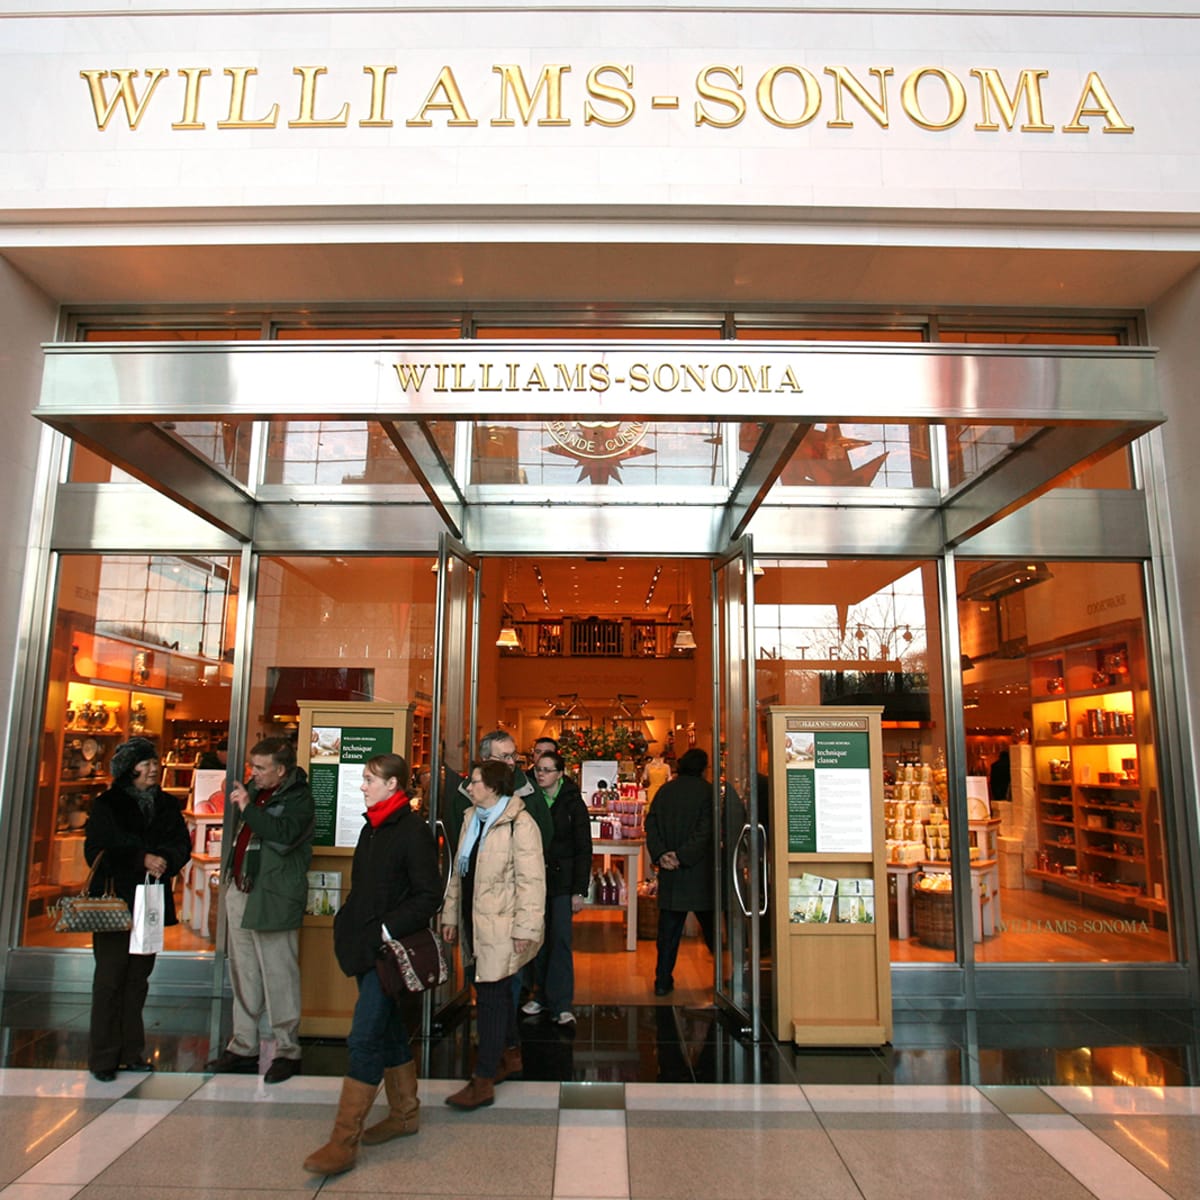 Williams-Sonoma fires scores of remote workers just days before Christmas